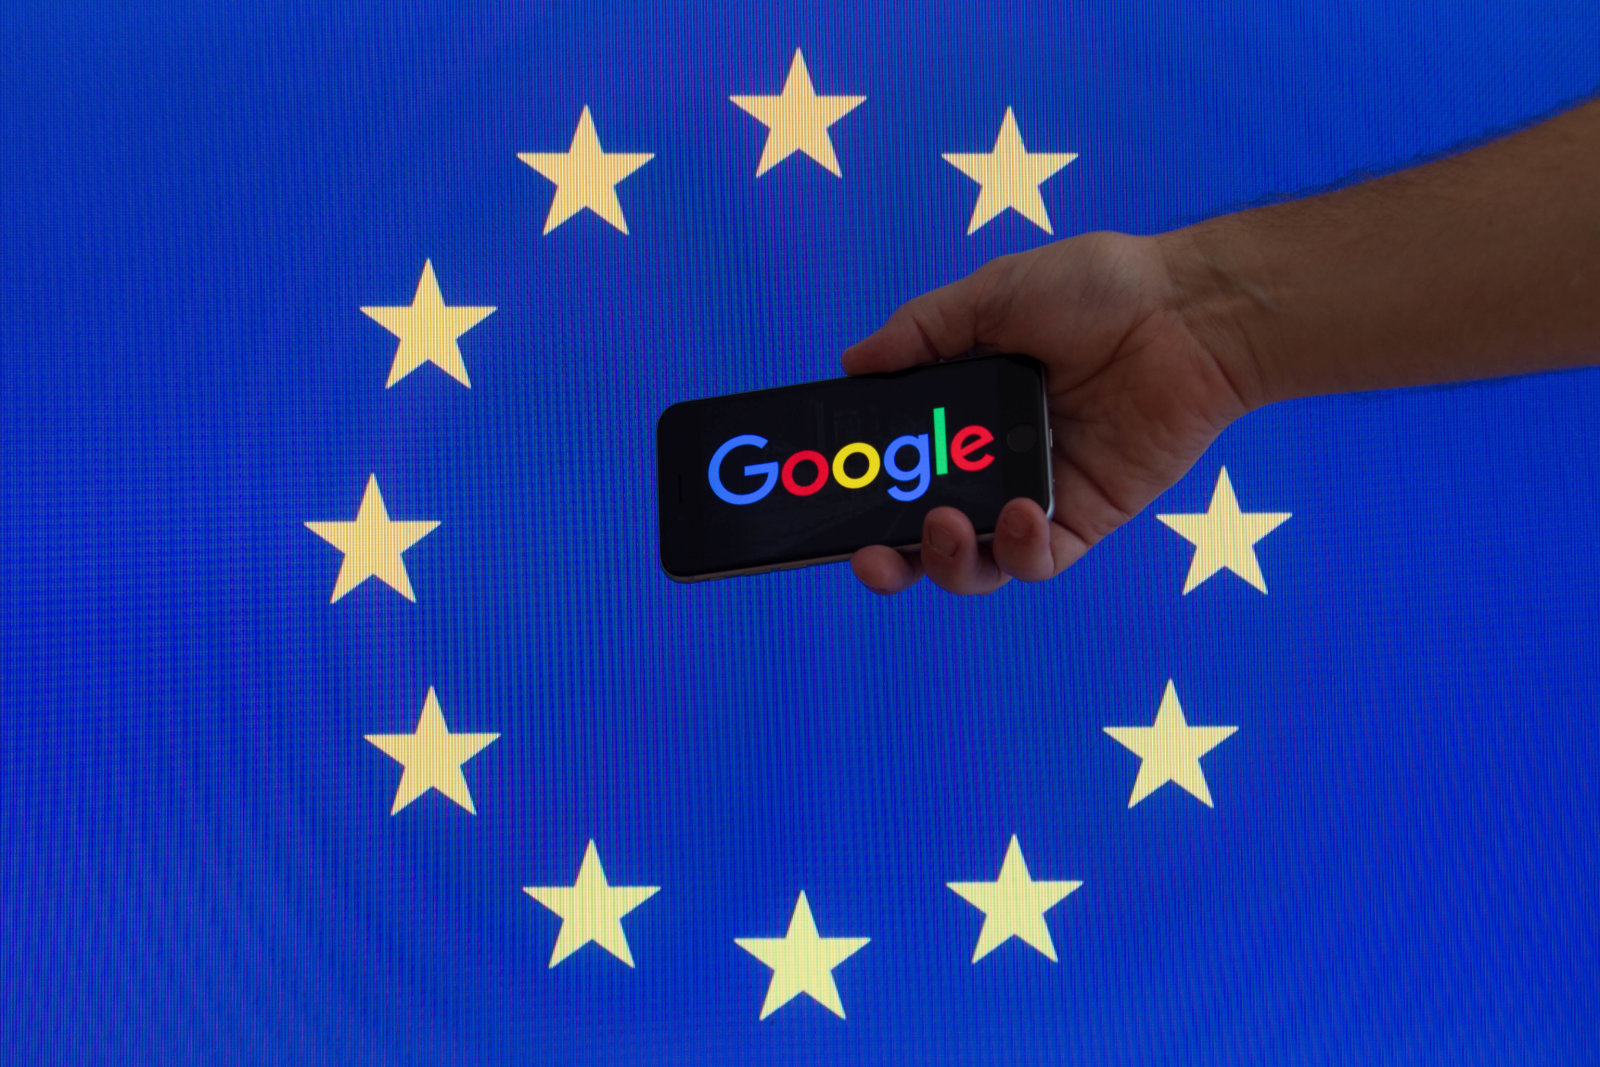 The EU flag is seen with Google logo. (Photo by Jaap Arriens/NurPhoto via Getty Images)